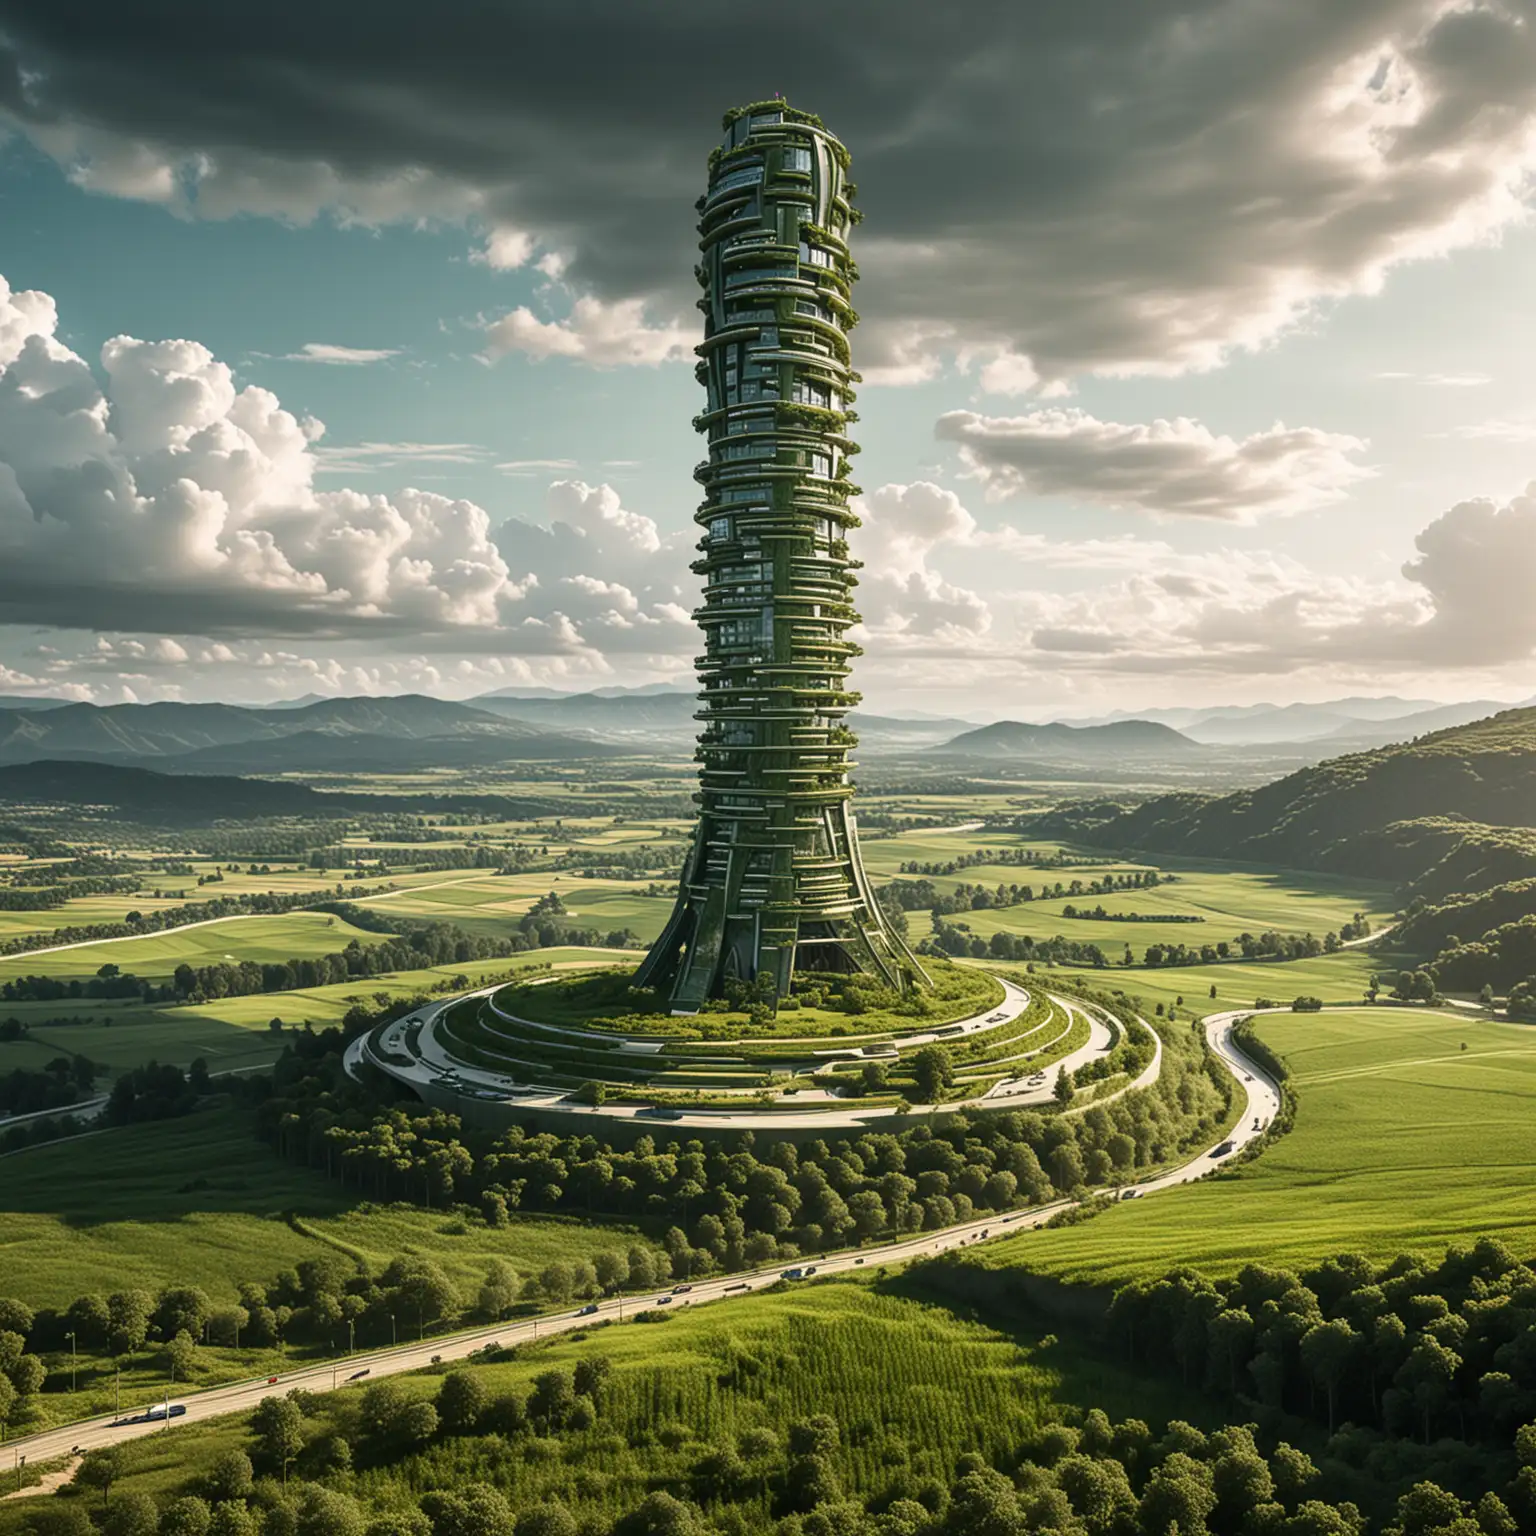 Futuristic Tower Rising from Verdant Open Field with Green Terraces